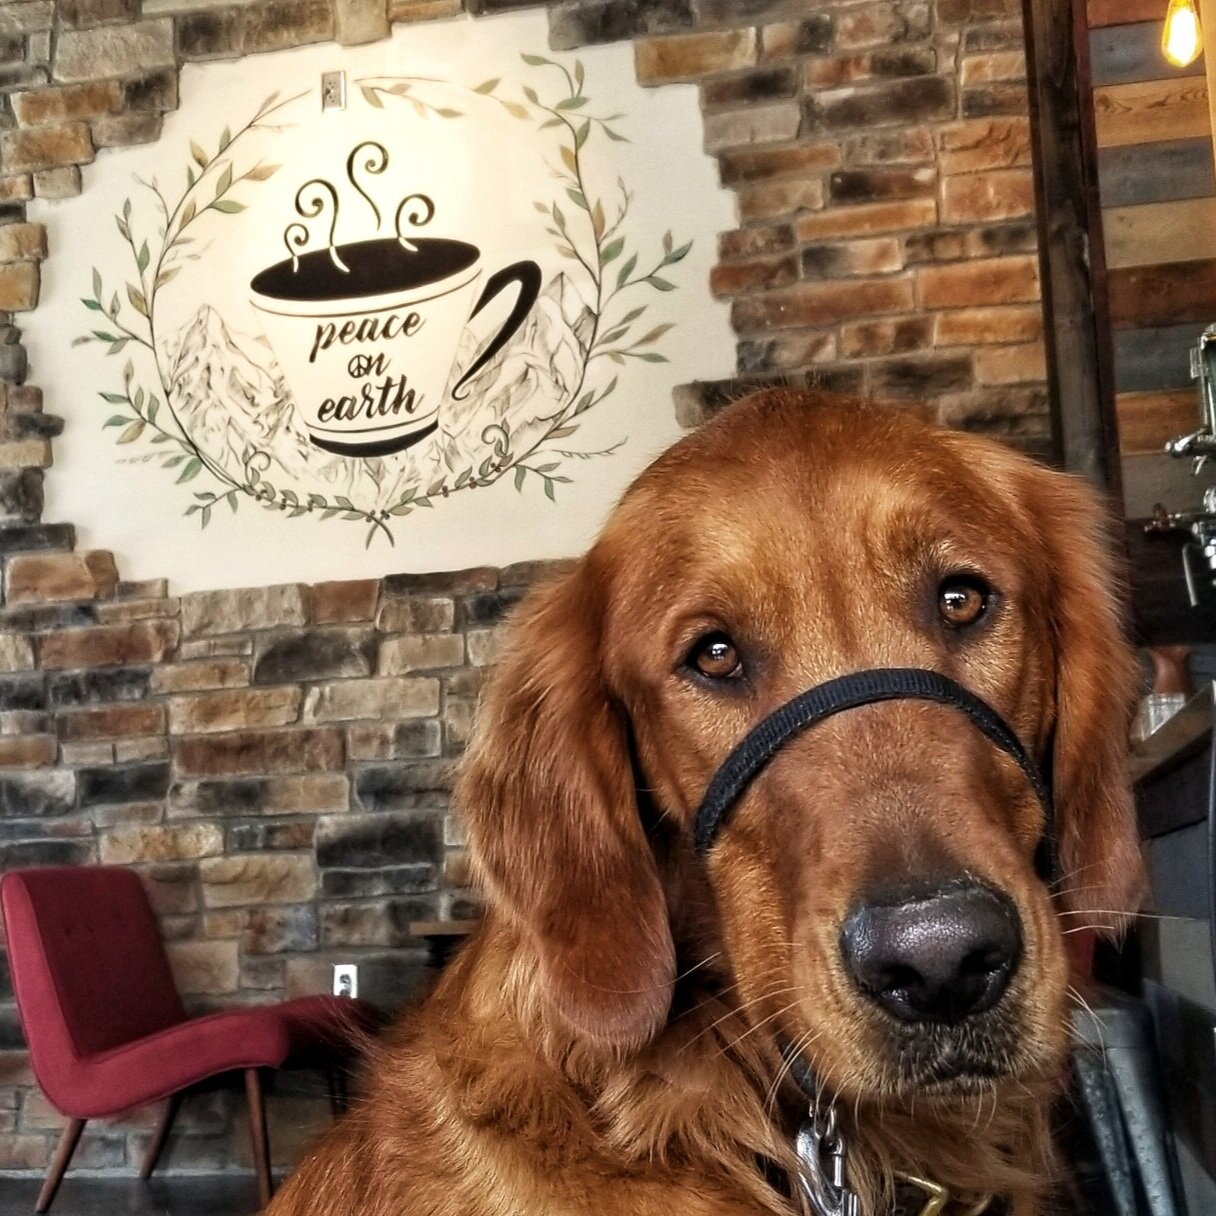 A golden retriever sits in front of a brick wall in a coffee shop